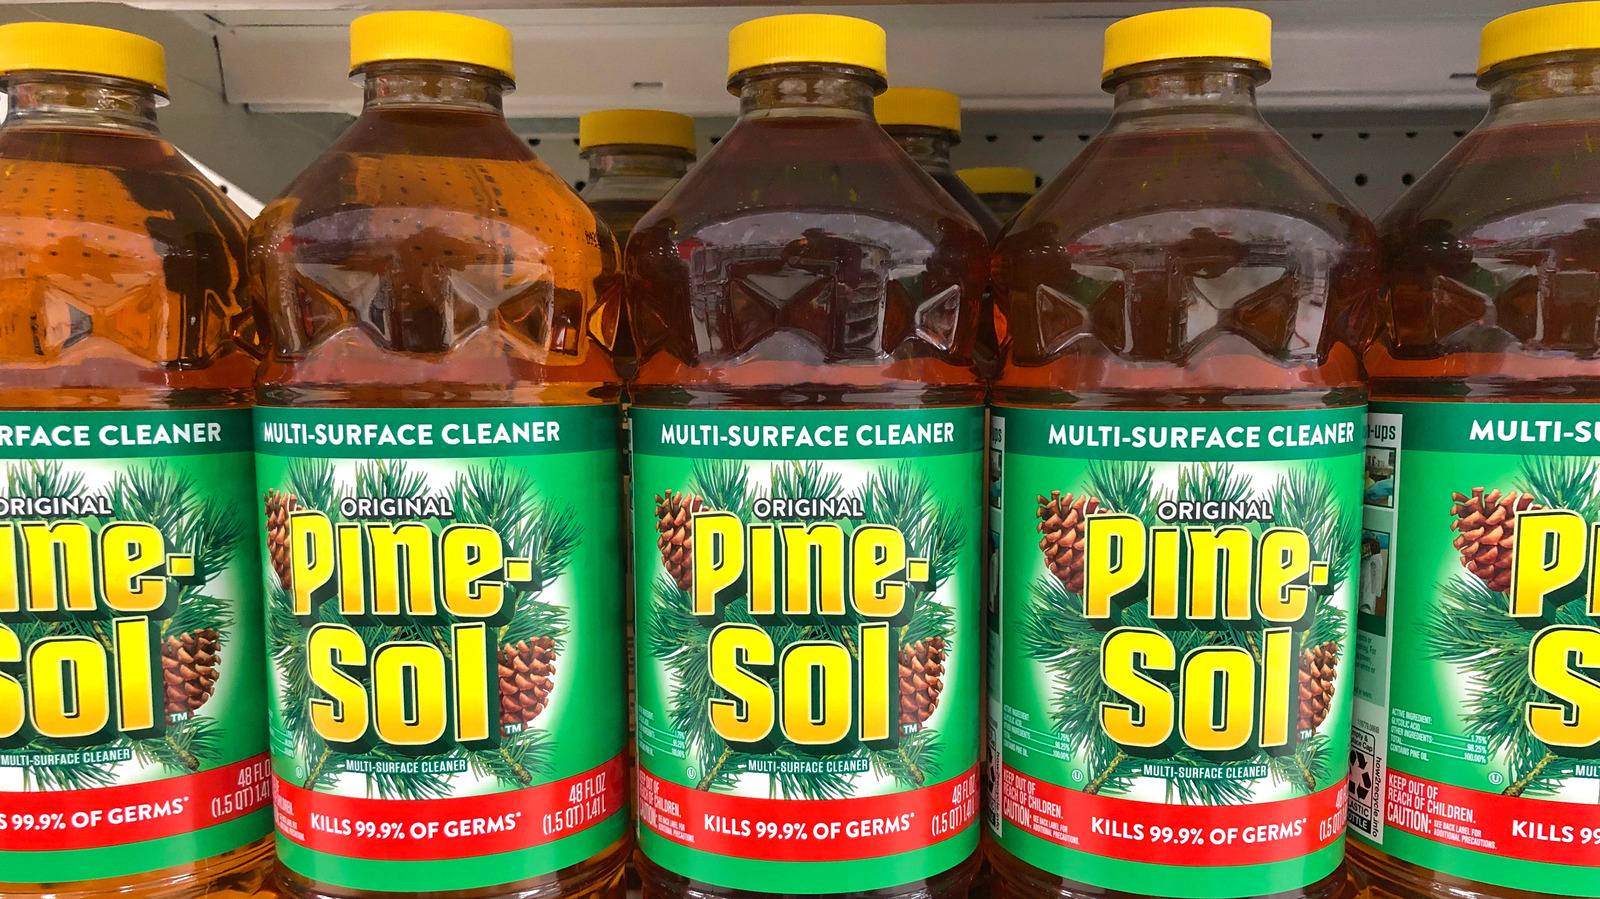 The Biggest Mistakes You're Making When Cleaning With Pine-Sol.